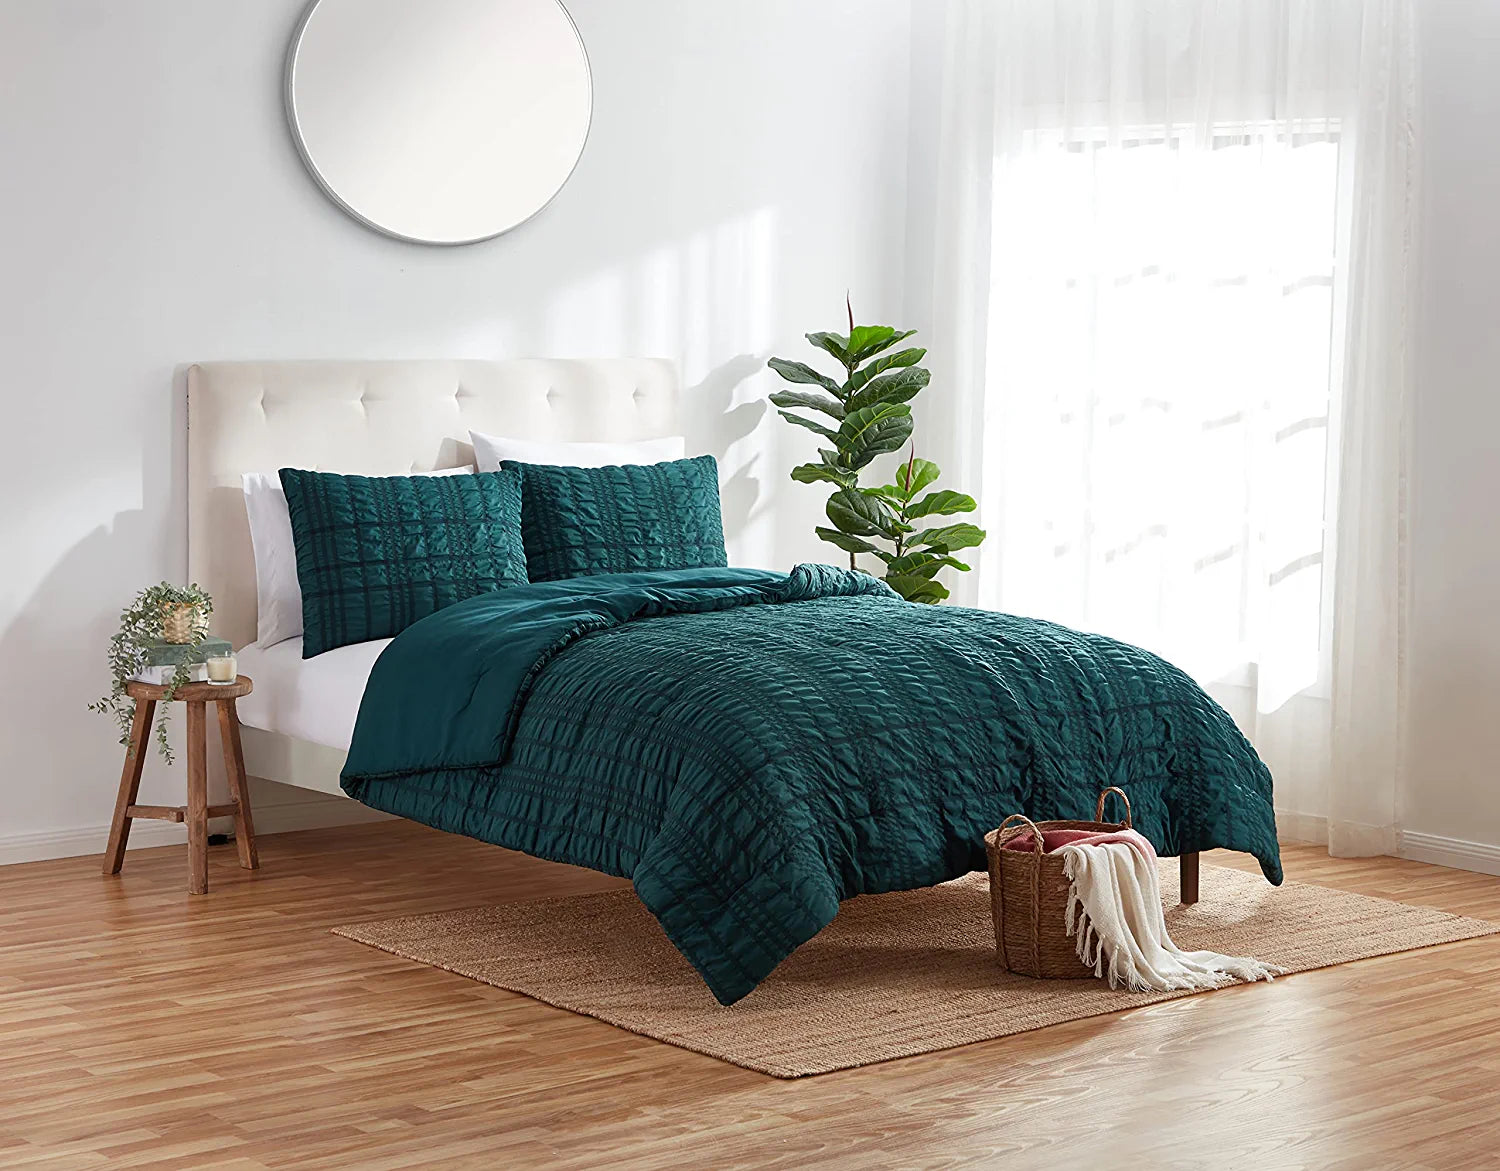 Refinery29 Home Collection Woven Seersucker Plaid Comforter Set, Twin/Twin XL, 2 Pieces